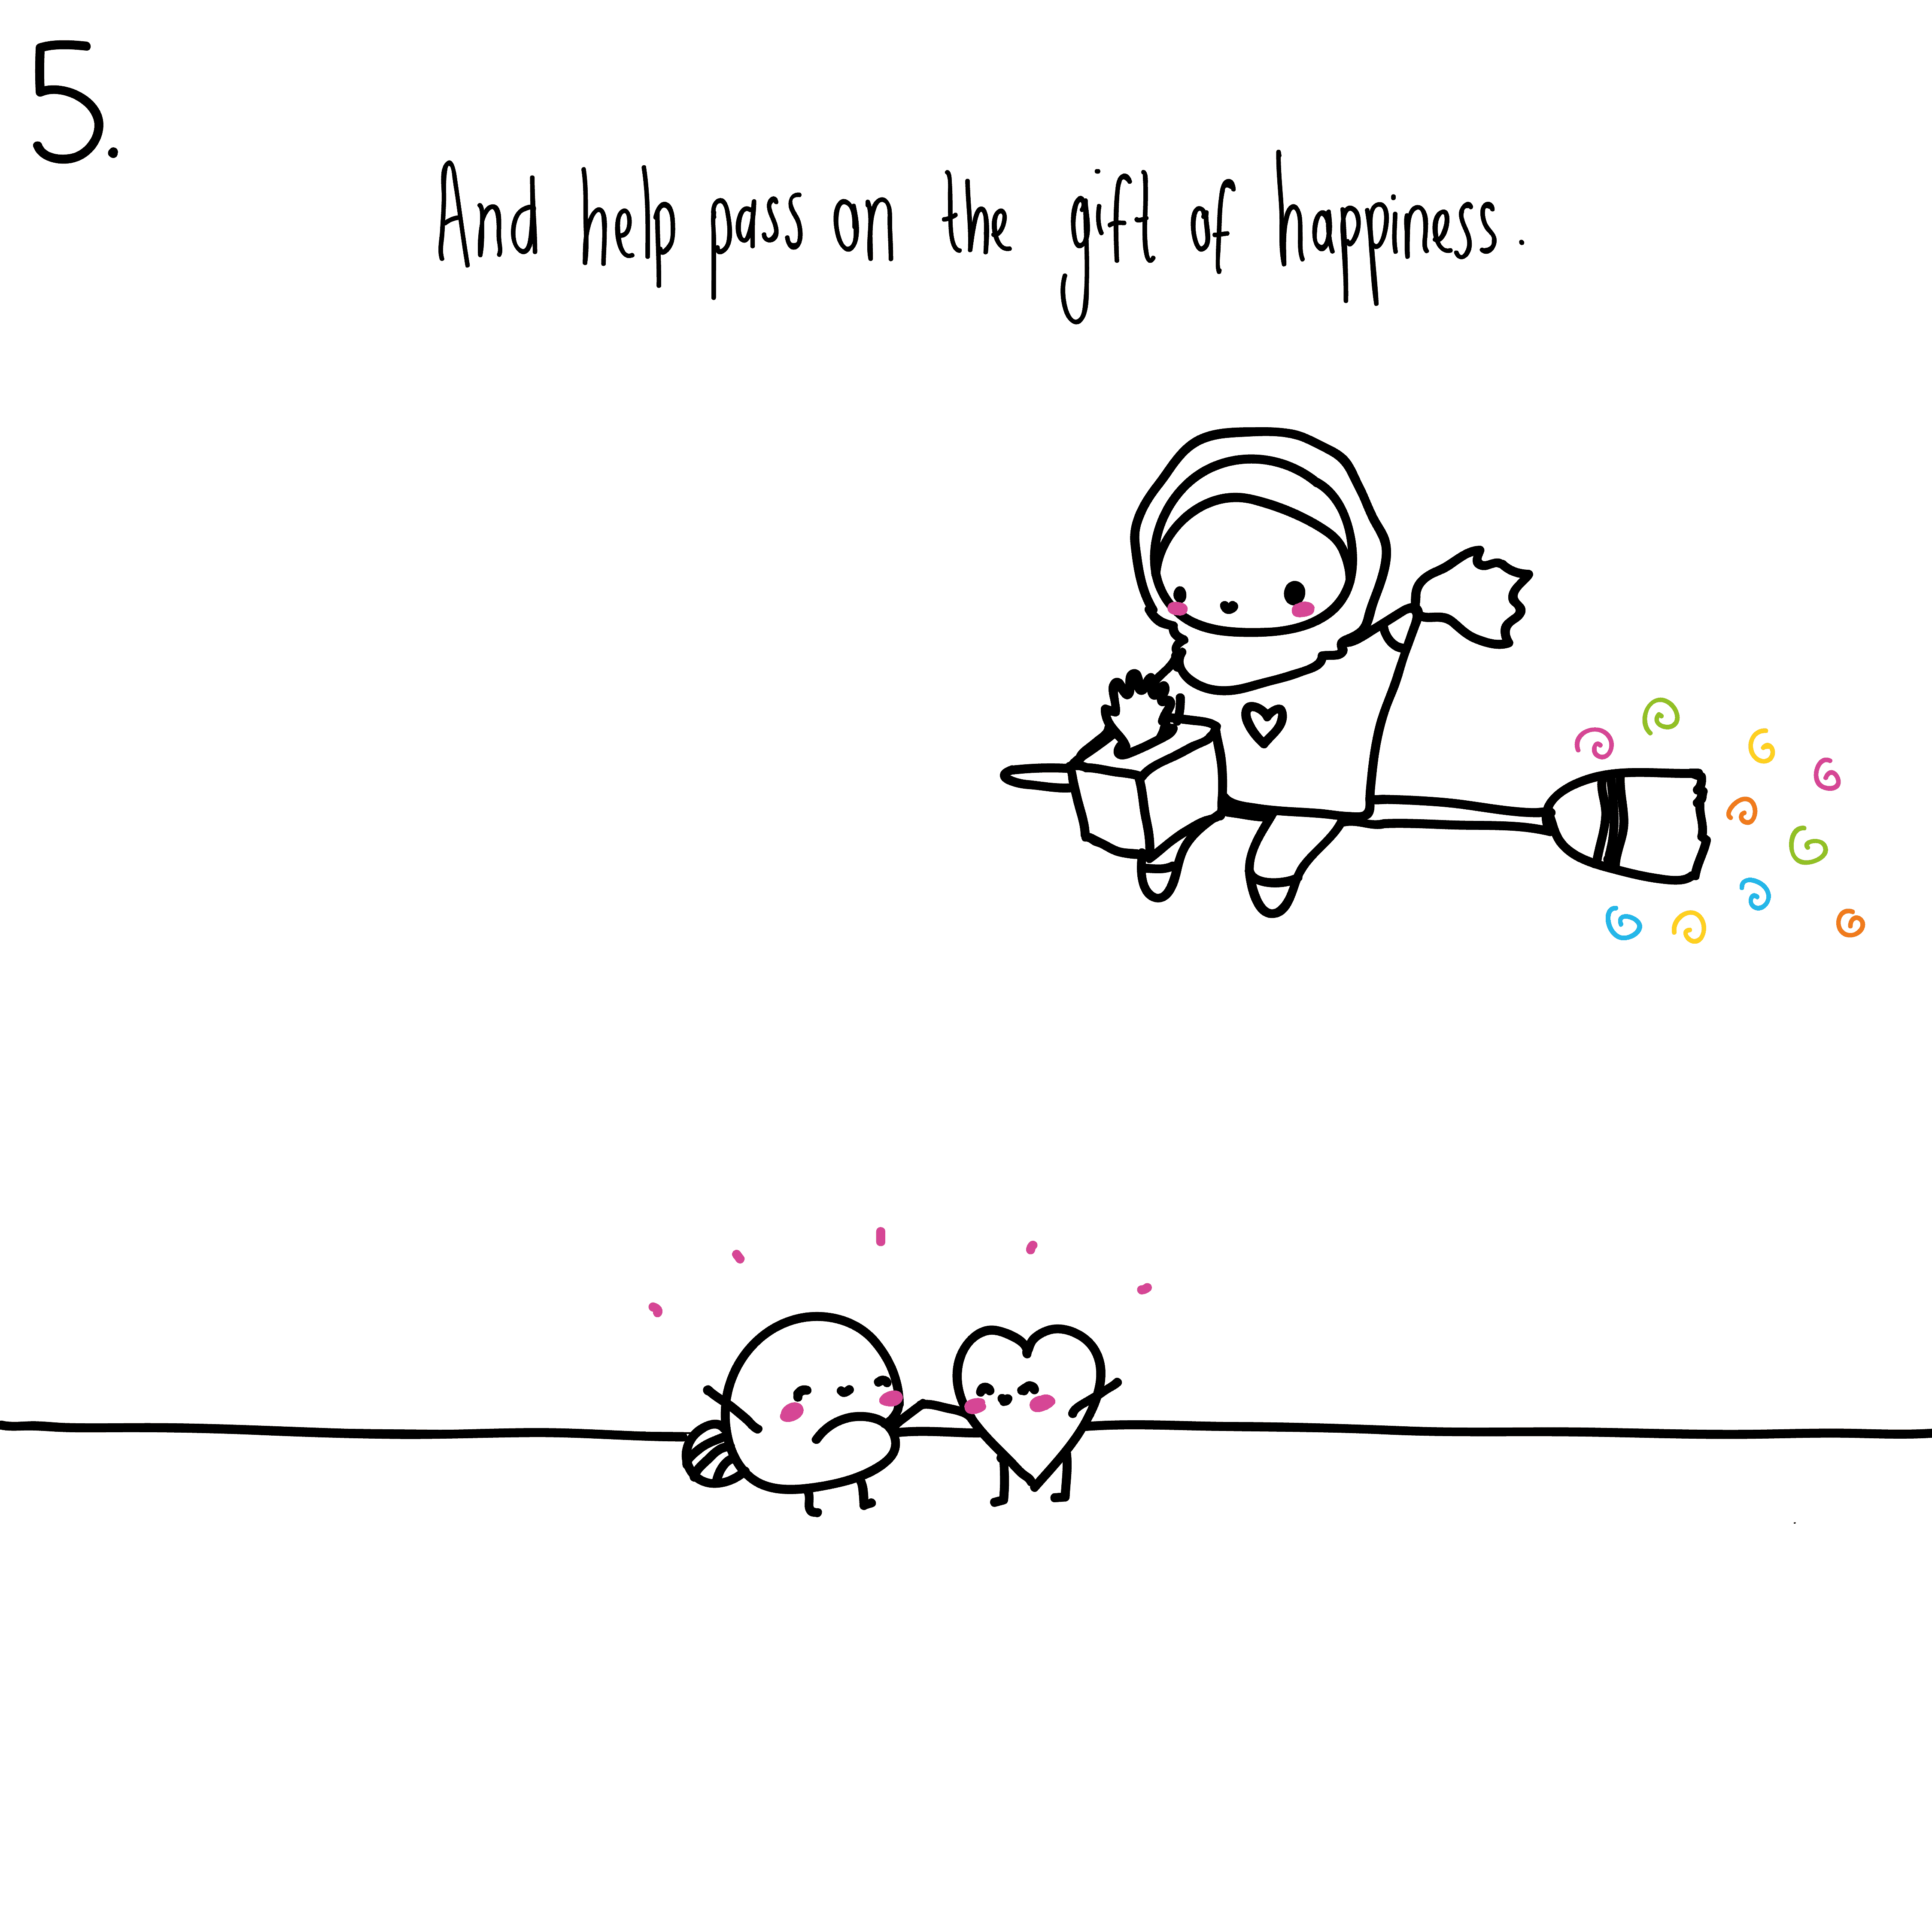 mindful-bubbles-doodle-1-giving-makes-the-world-go-round-5